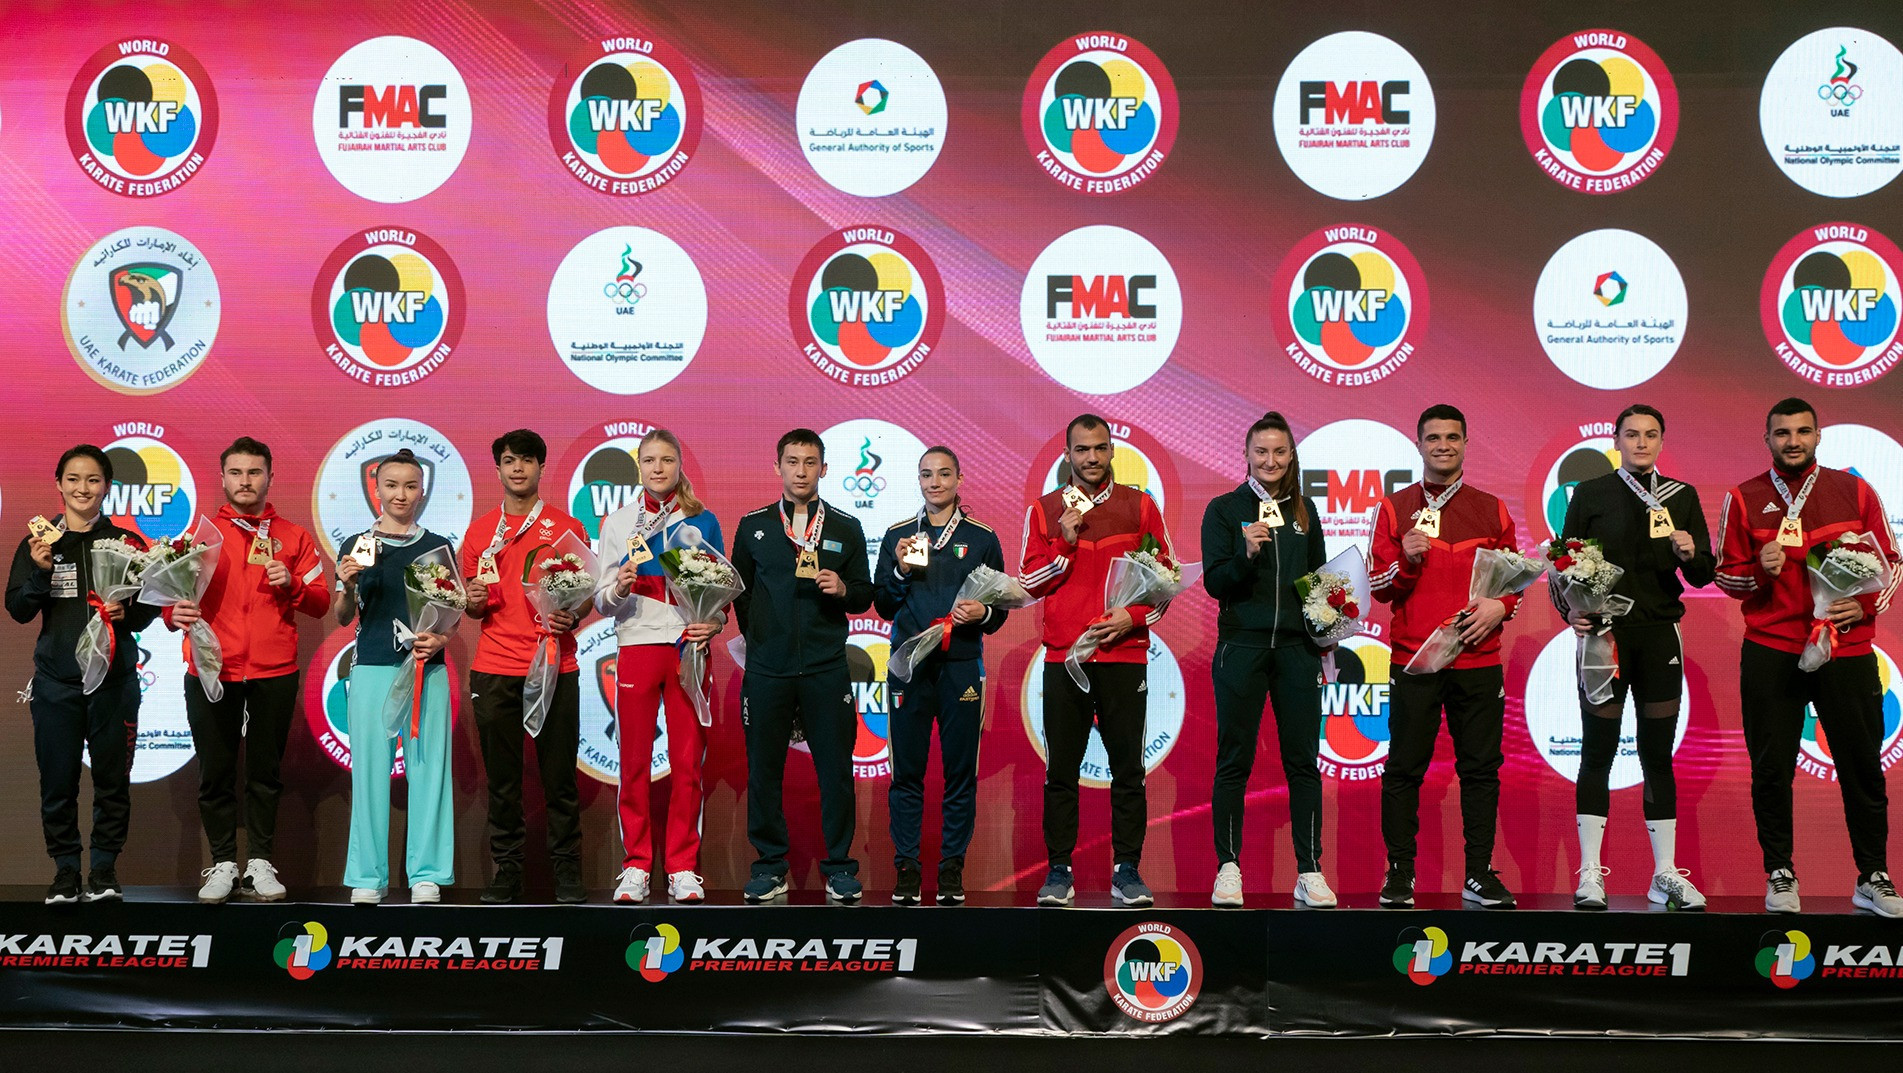 Egypt topped the medals table with three golds at the Karate 1-Premier League event in Fujairah ©WKF